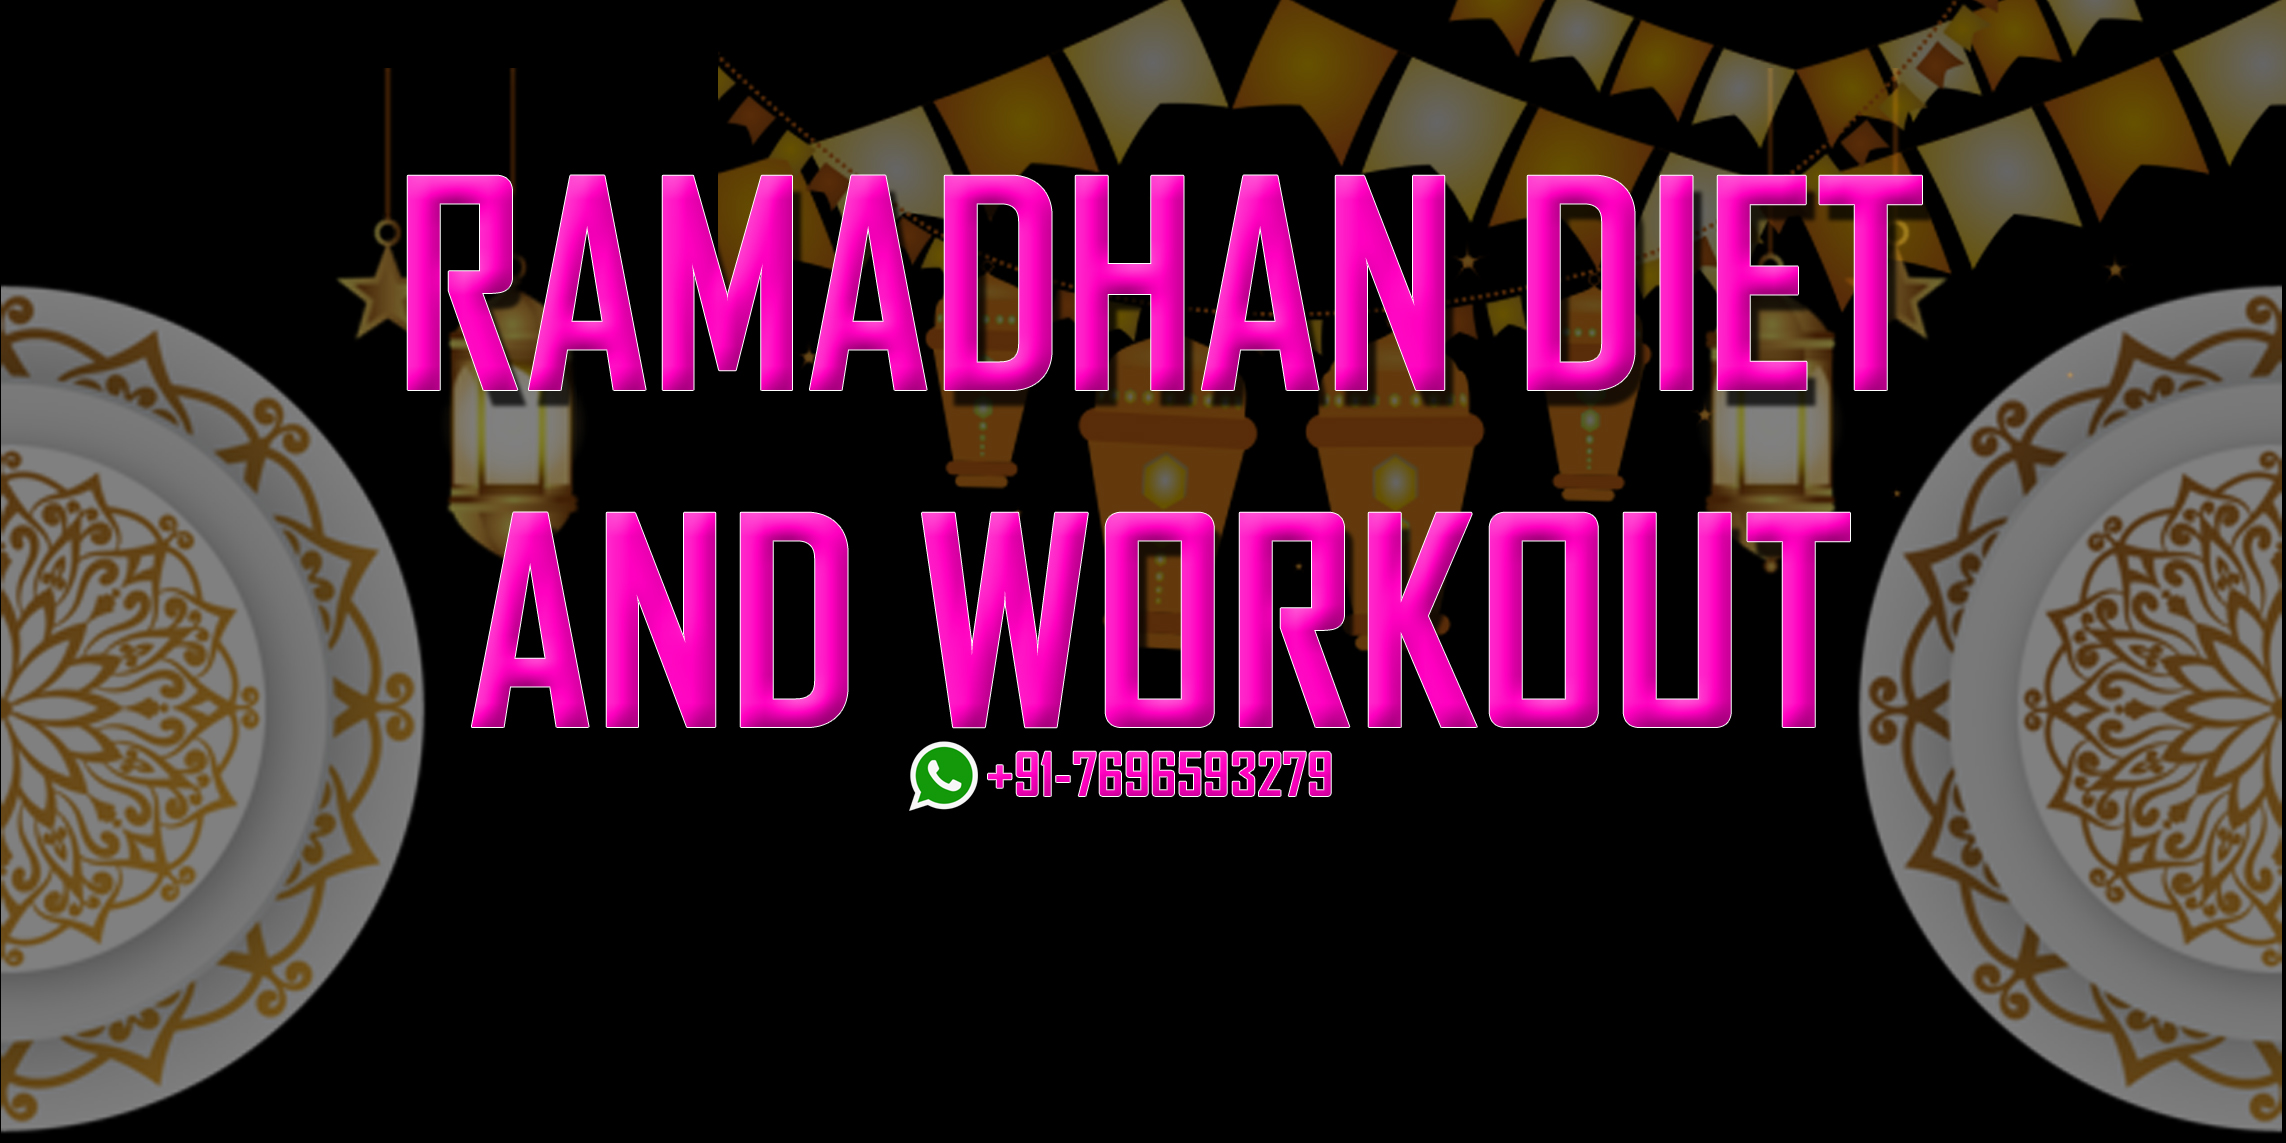 Diet Plan for Ramadhan (Workout added)